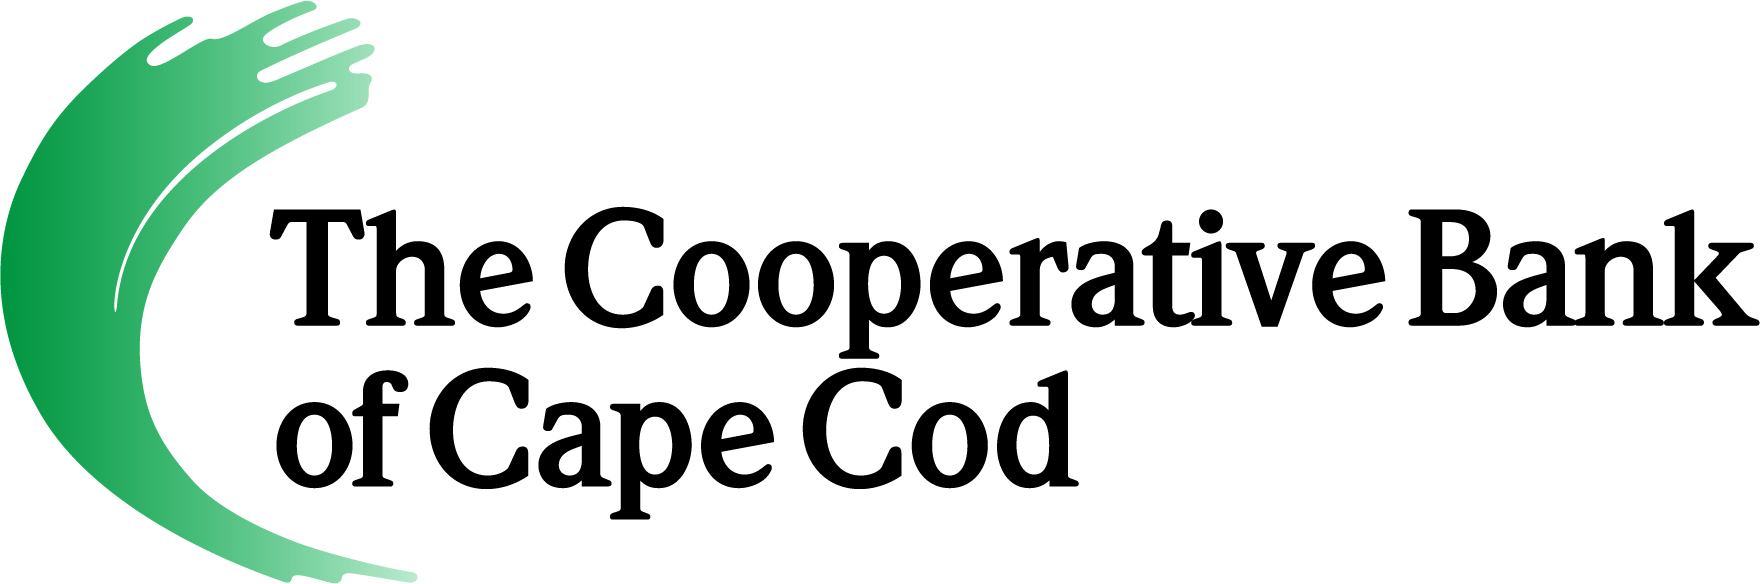 The Cooperative Bank of Cape Cod 2024 logo